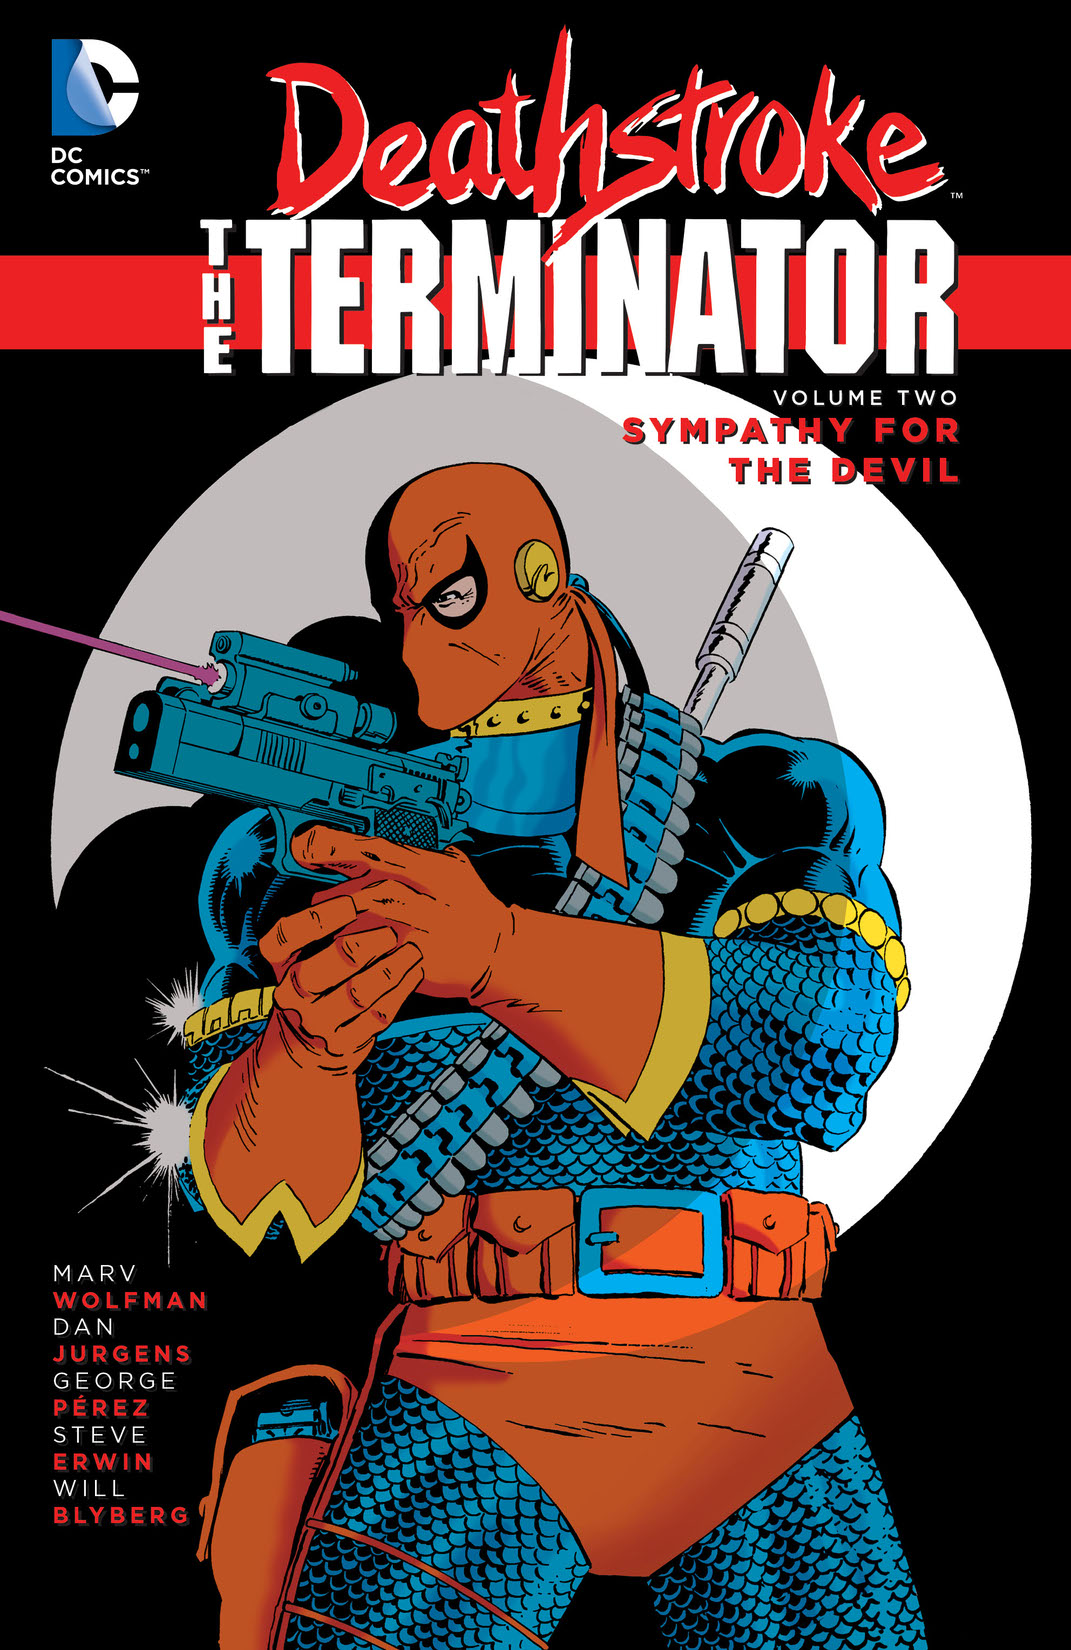 Deathstroke: The Terminator Vol. 2: Sympathy For The Devil preview images